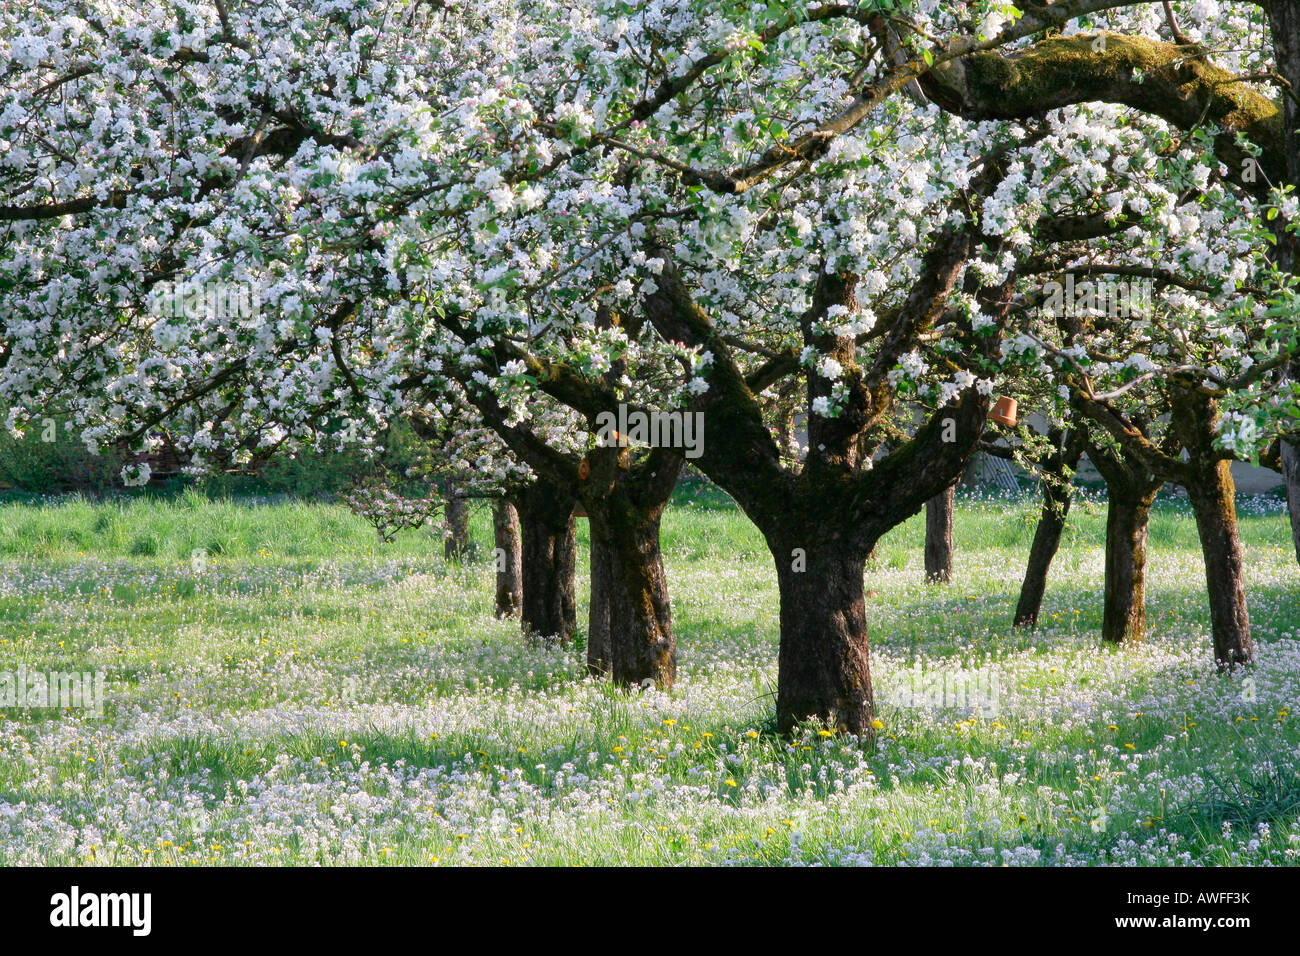 Blossoming apple trees (Malus domestica) on a mixed orchard along with Cuckoo Flowers or Lady's Smock (Cardamine pratensis), Up Stock Photo